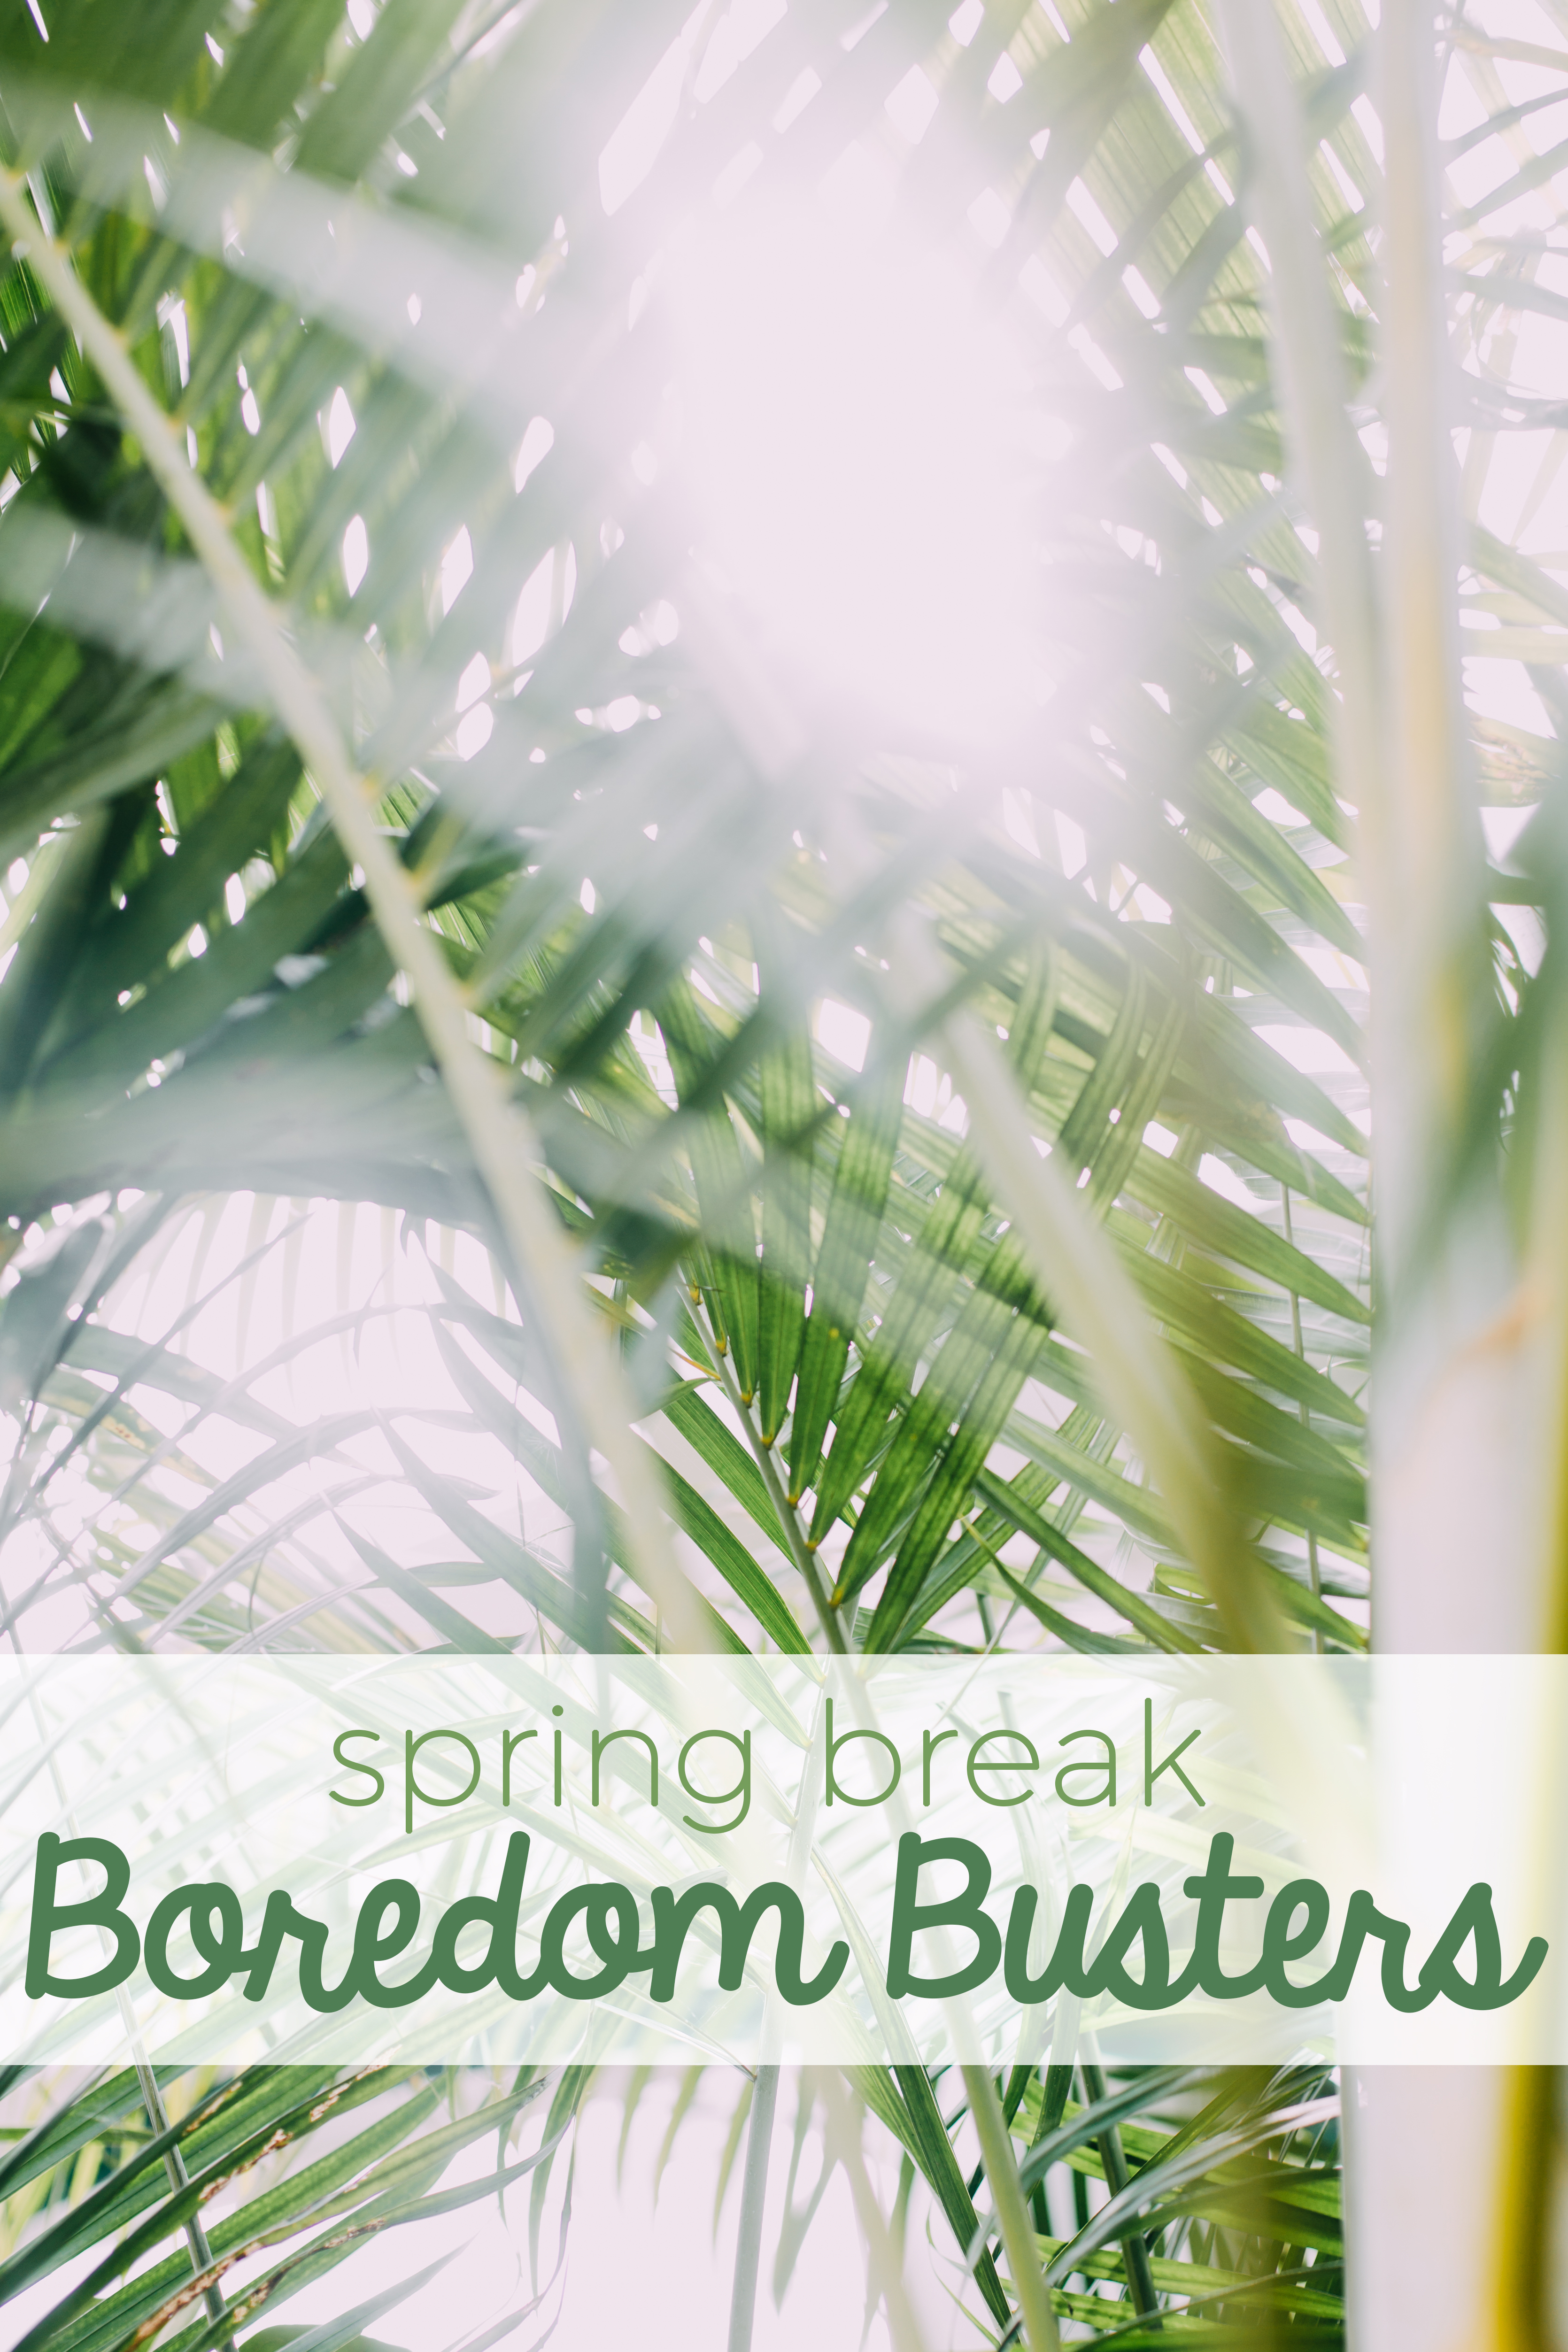 Looking for the perfect spring break boredom busters for kids? Turn off the tech and check out this top 10 list of ways to prevent hearing "I'm bored" during spring break! | tech free | parenting | boredom busters |